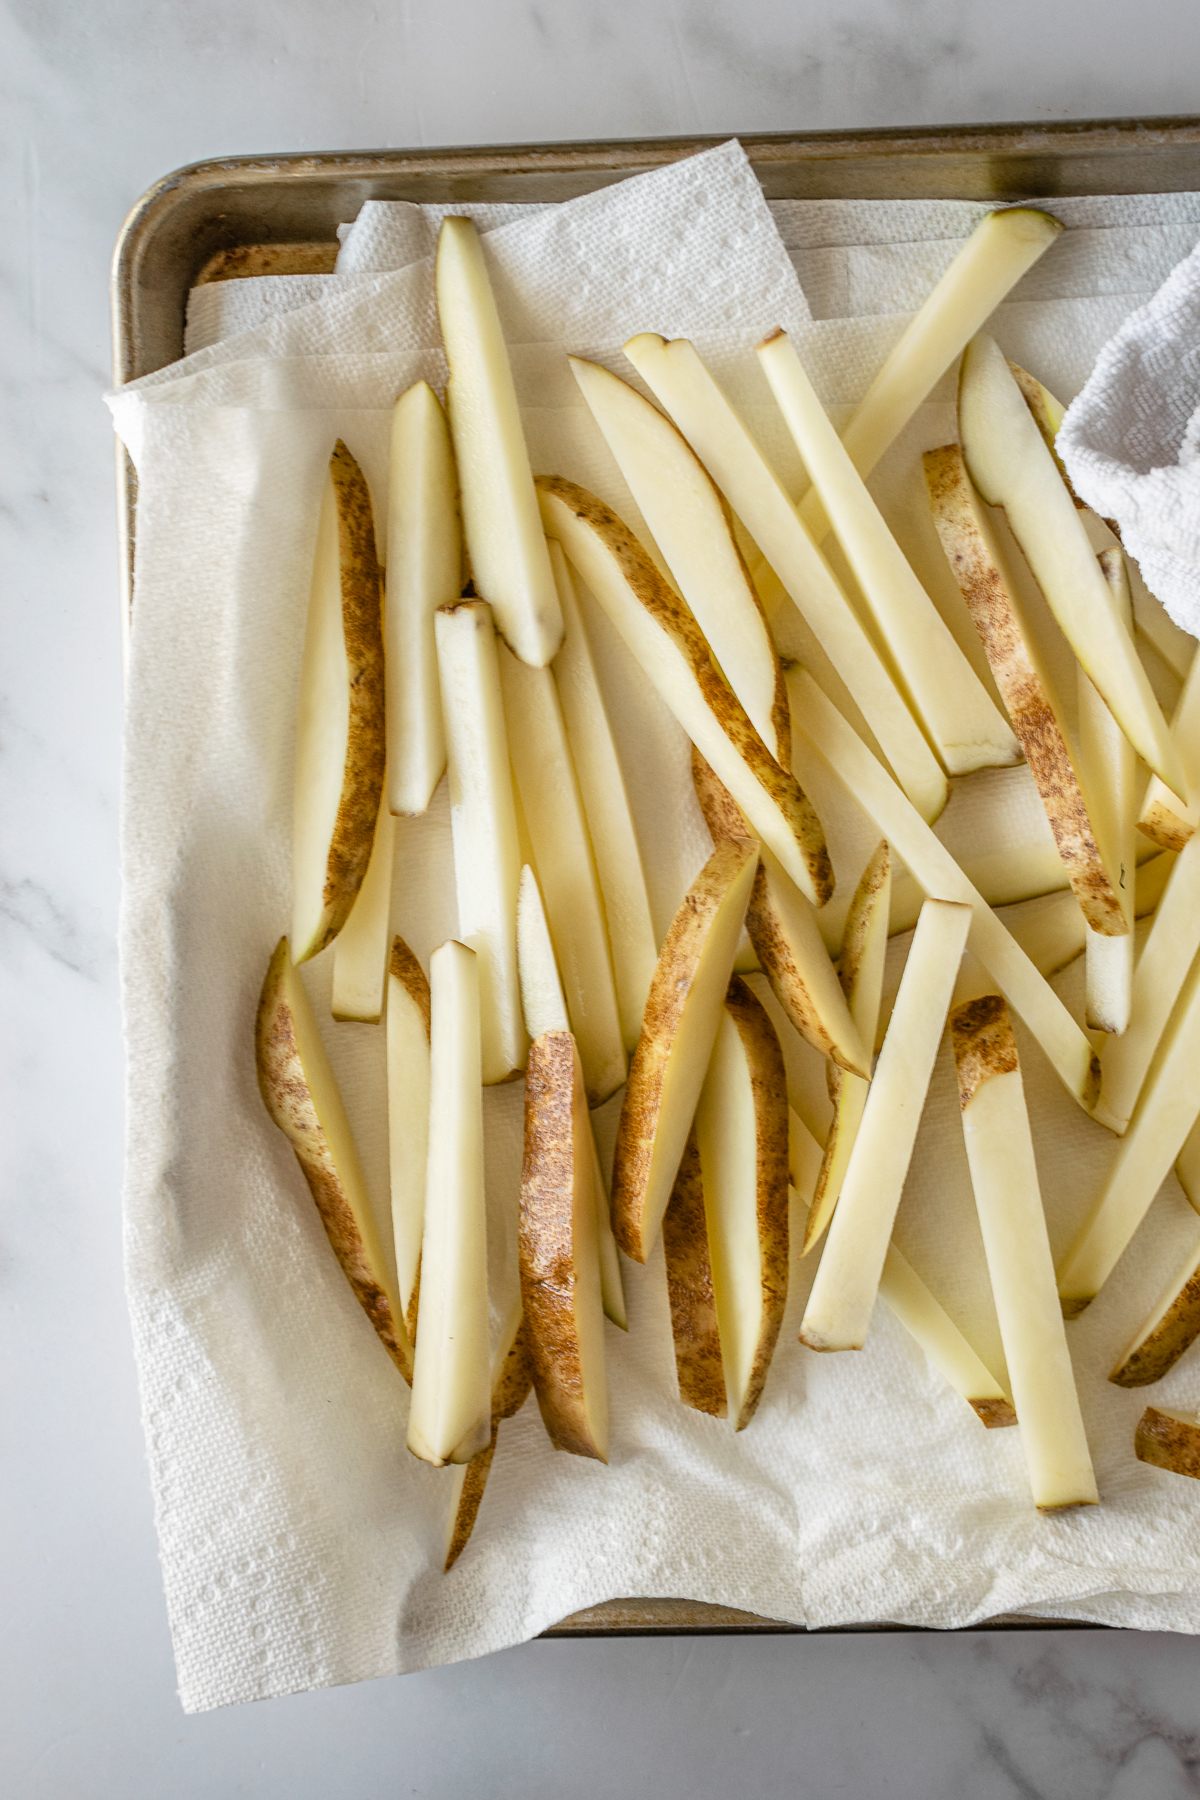 pre-baked sliced french fries sitting on paper towels on a baking sheet.